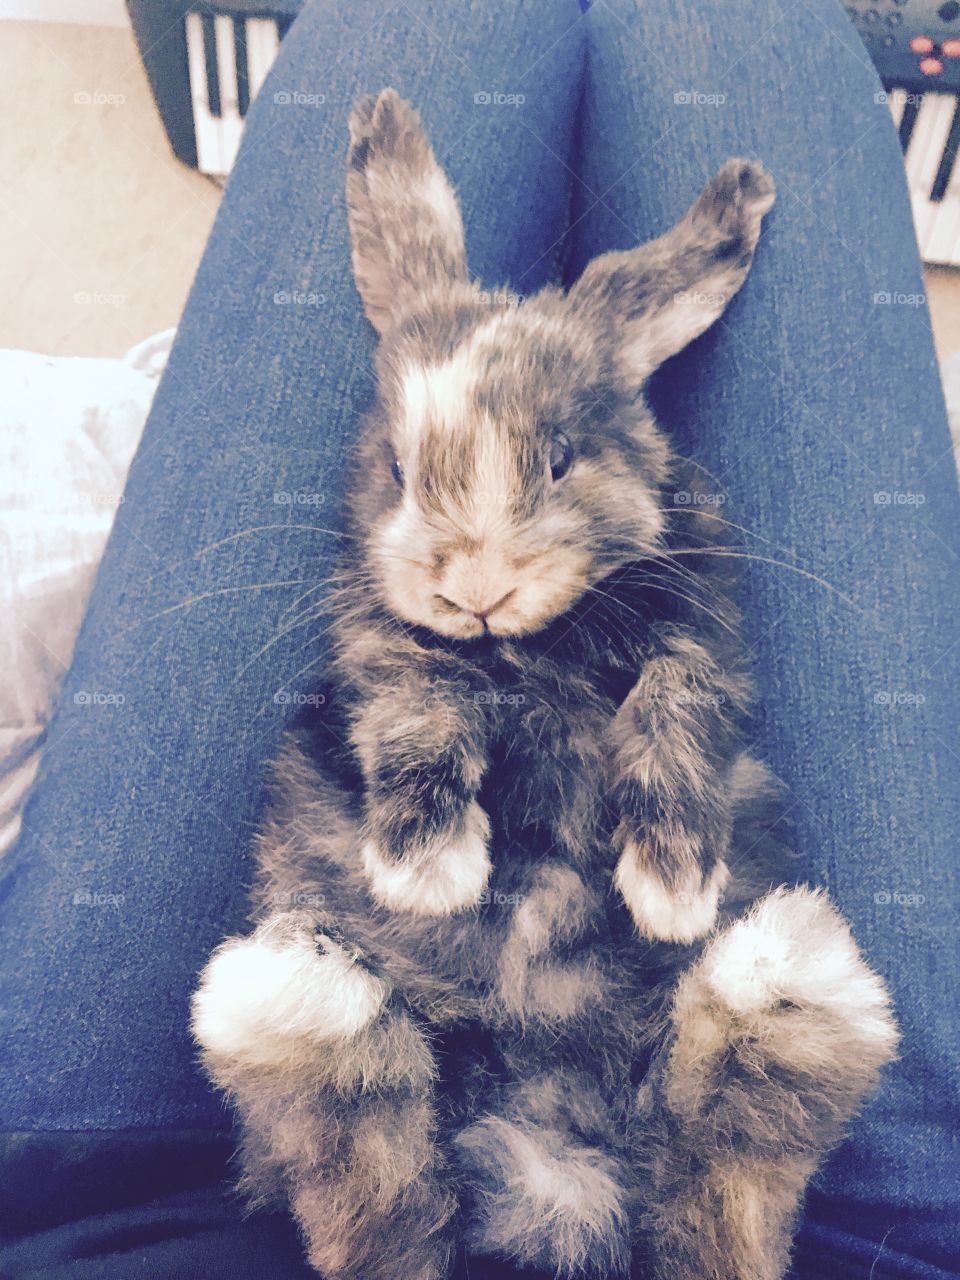 Baby bunny relaxing in his owners lap.